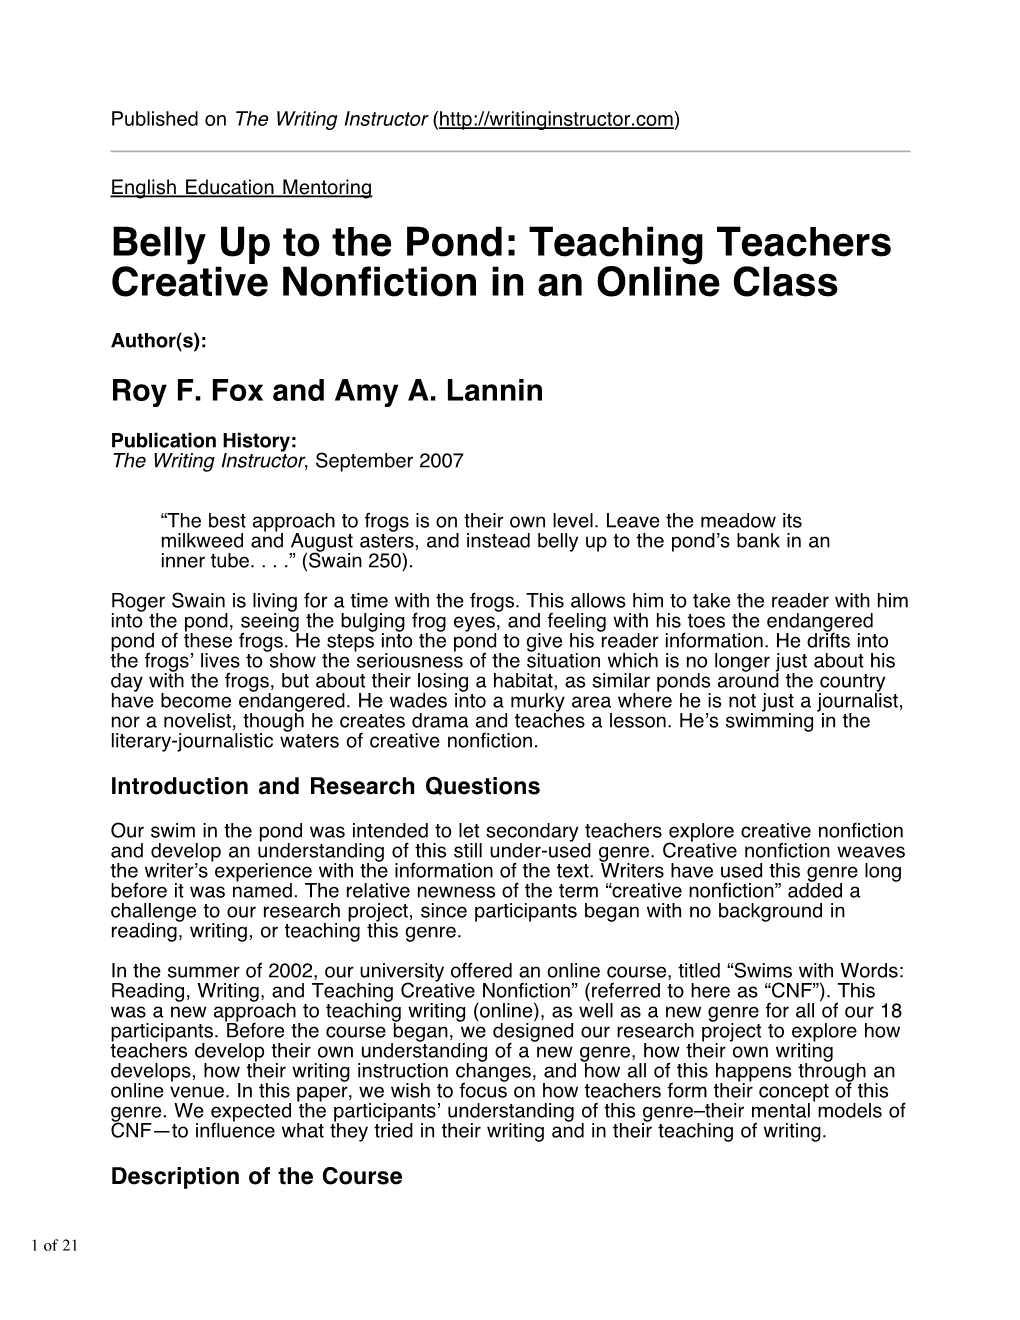 Belly up to the Pond: Teaching Teachers Creative Nonfiction in an Online Class